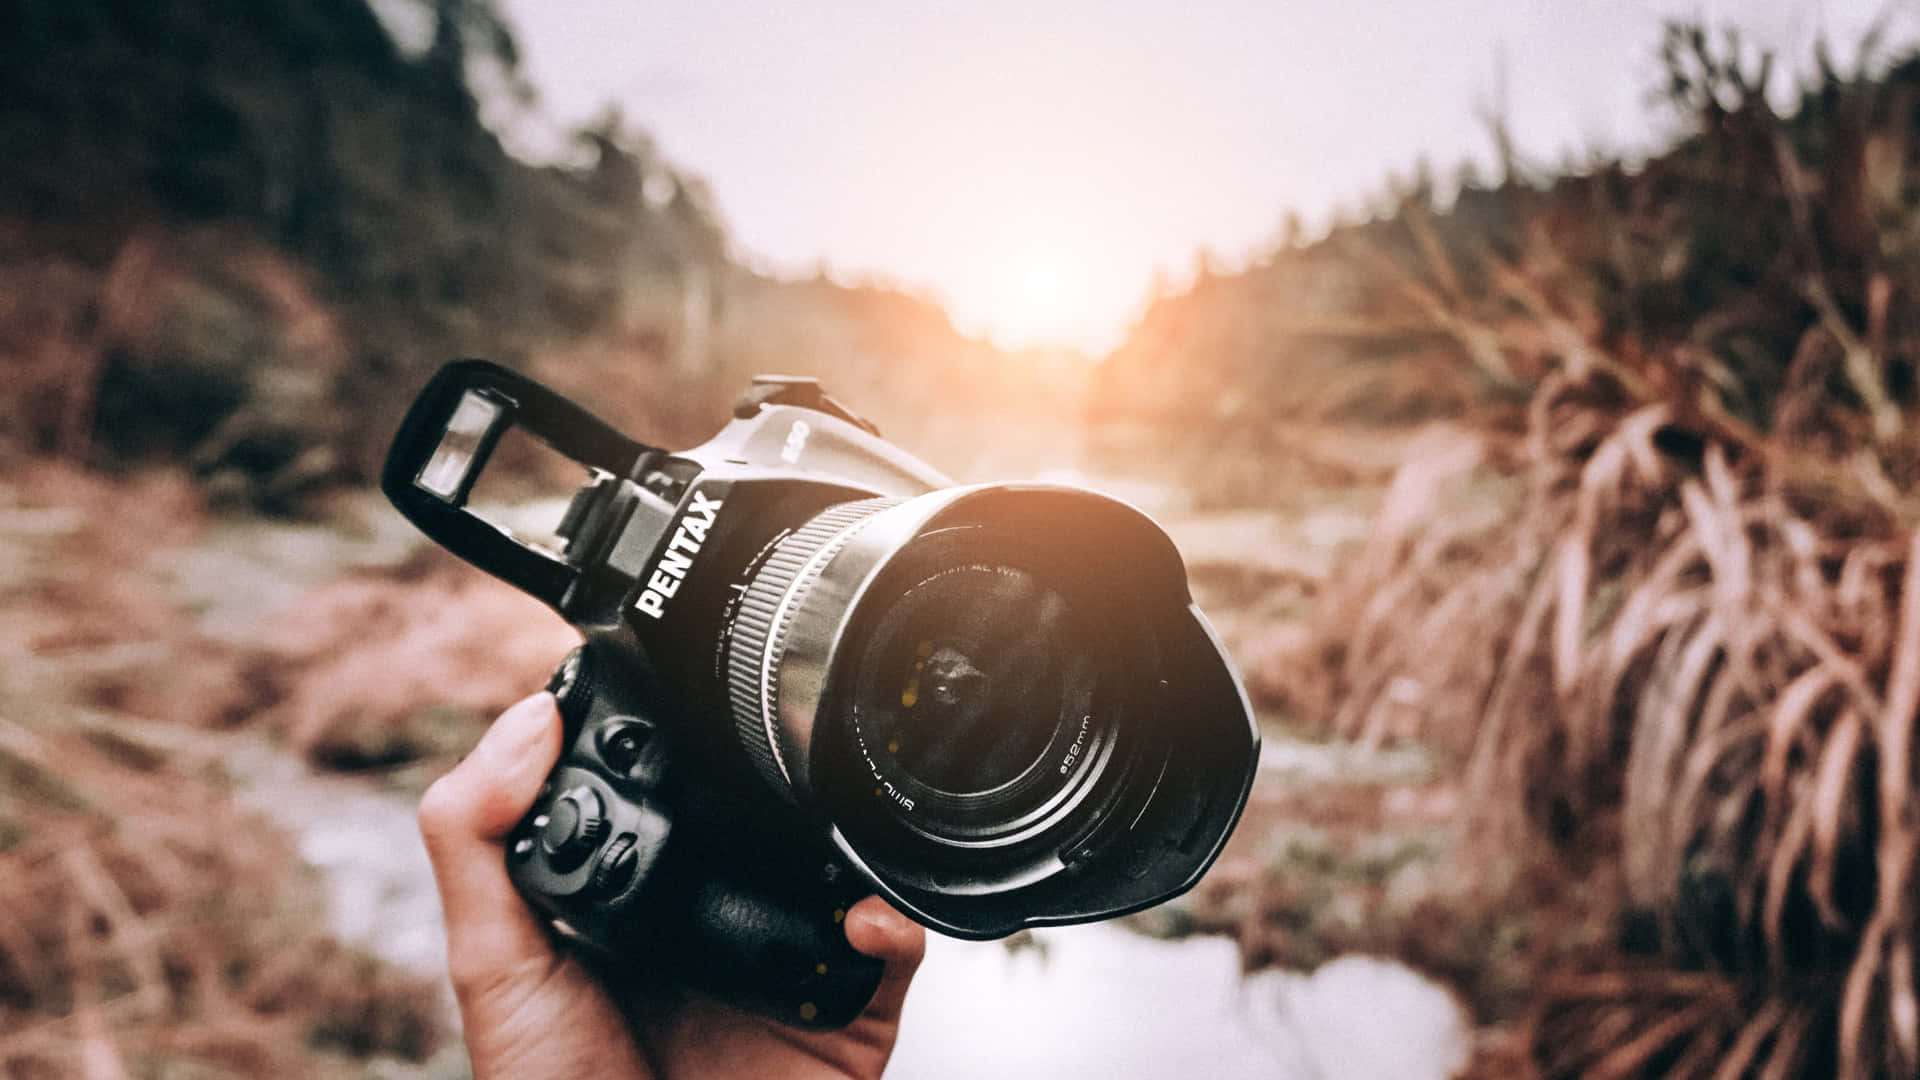 Capturing life's beautiful moments with a DSLR camera.